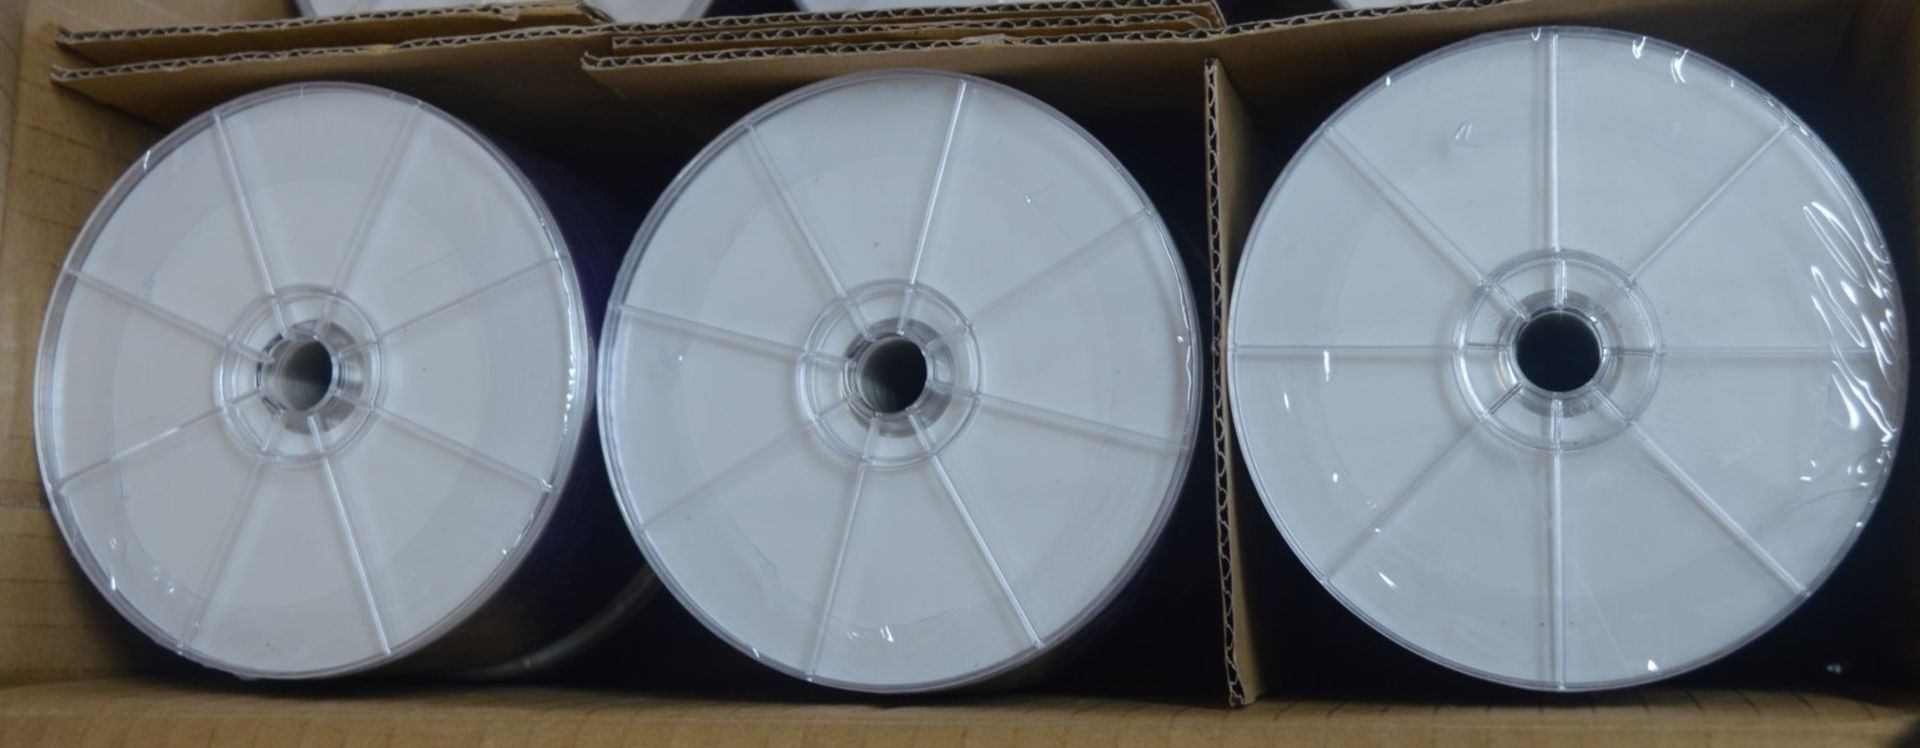 150 x Traxdata Full Surface Thermal Printable DVDR 8X Discs - Includes 3 x 4.7gb Cake of 50 - Image 2 of 4